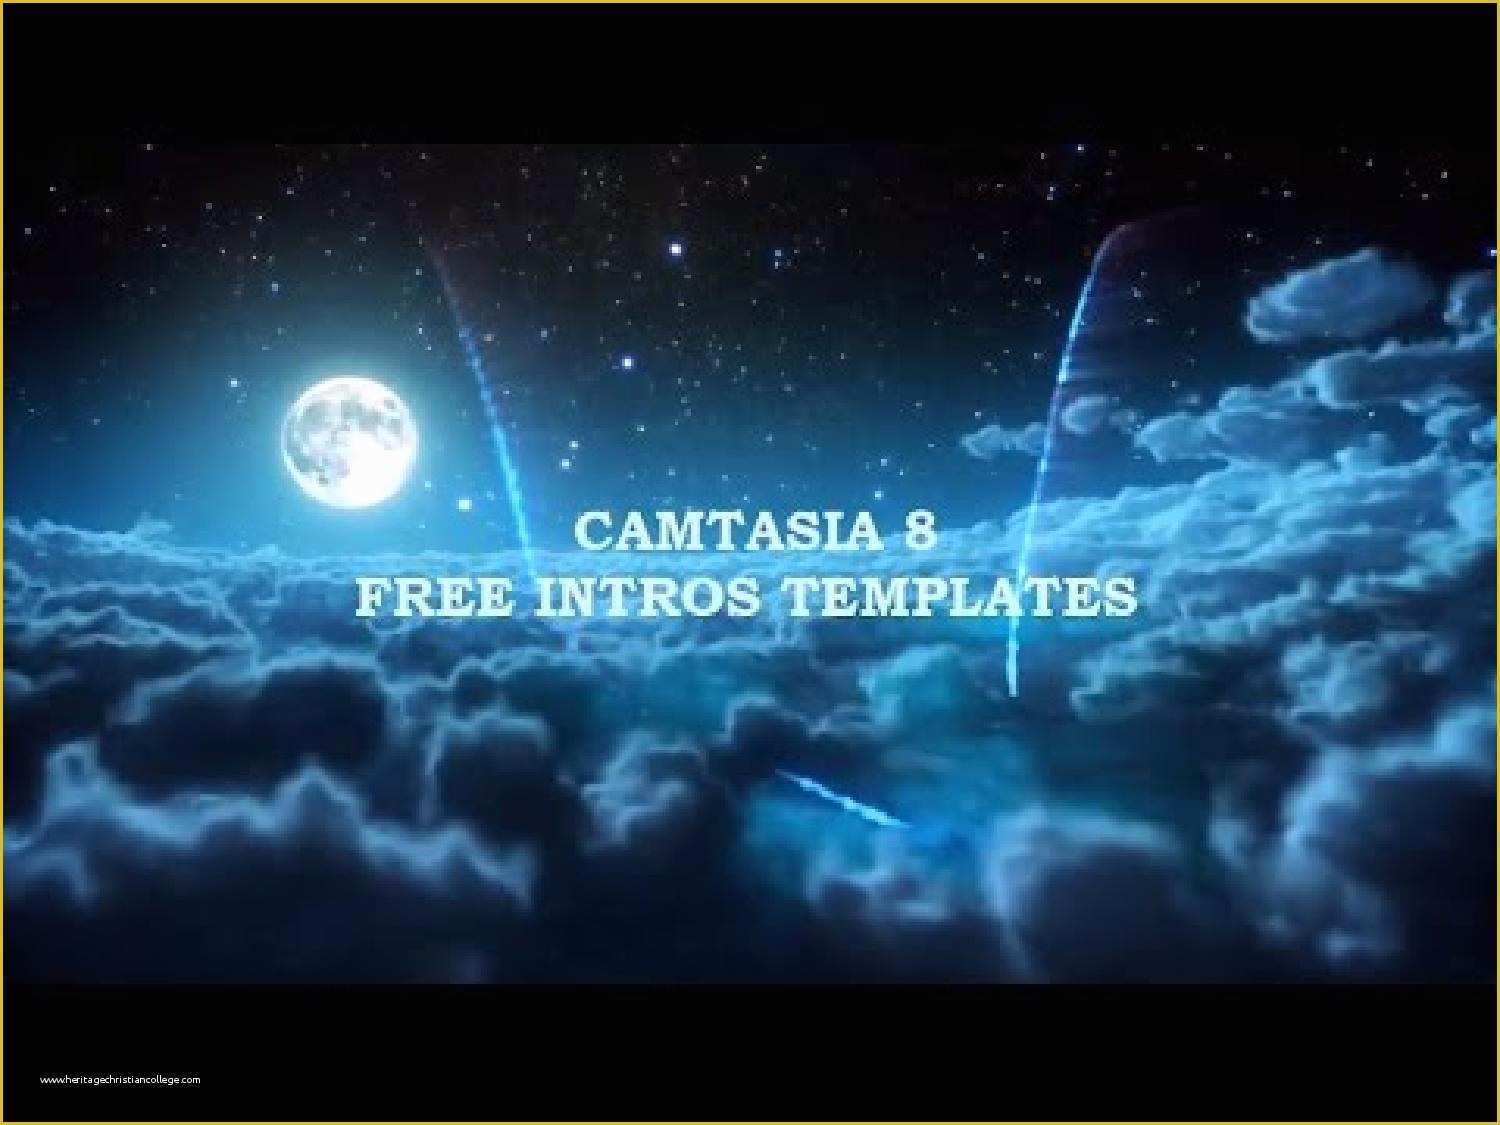 Free Introduction Video Templates Of Free Camtasia Studio 8 Intro Video Templates Epic Intro